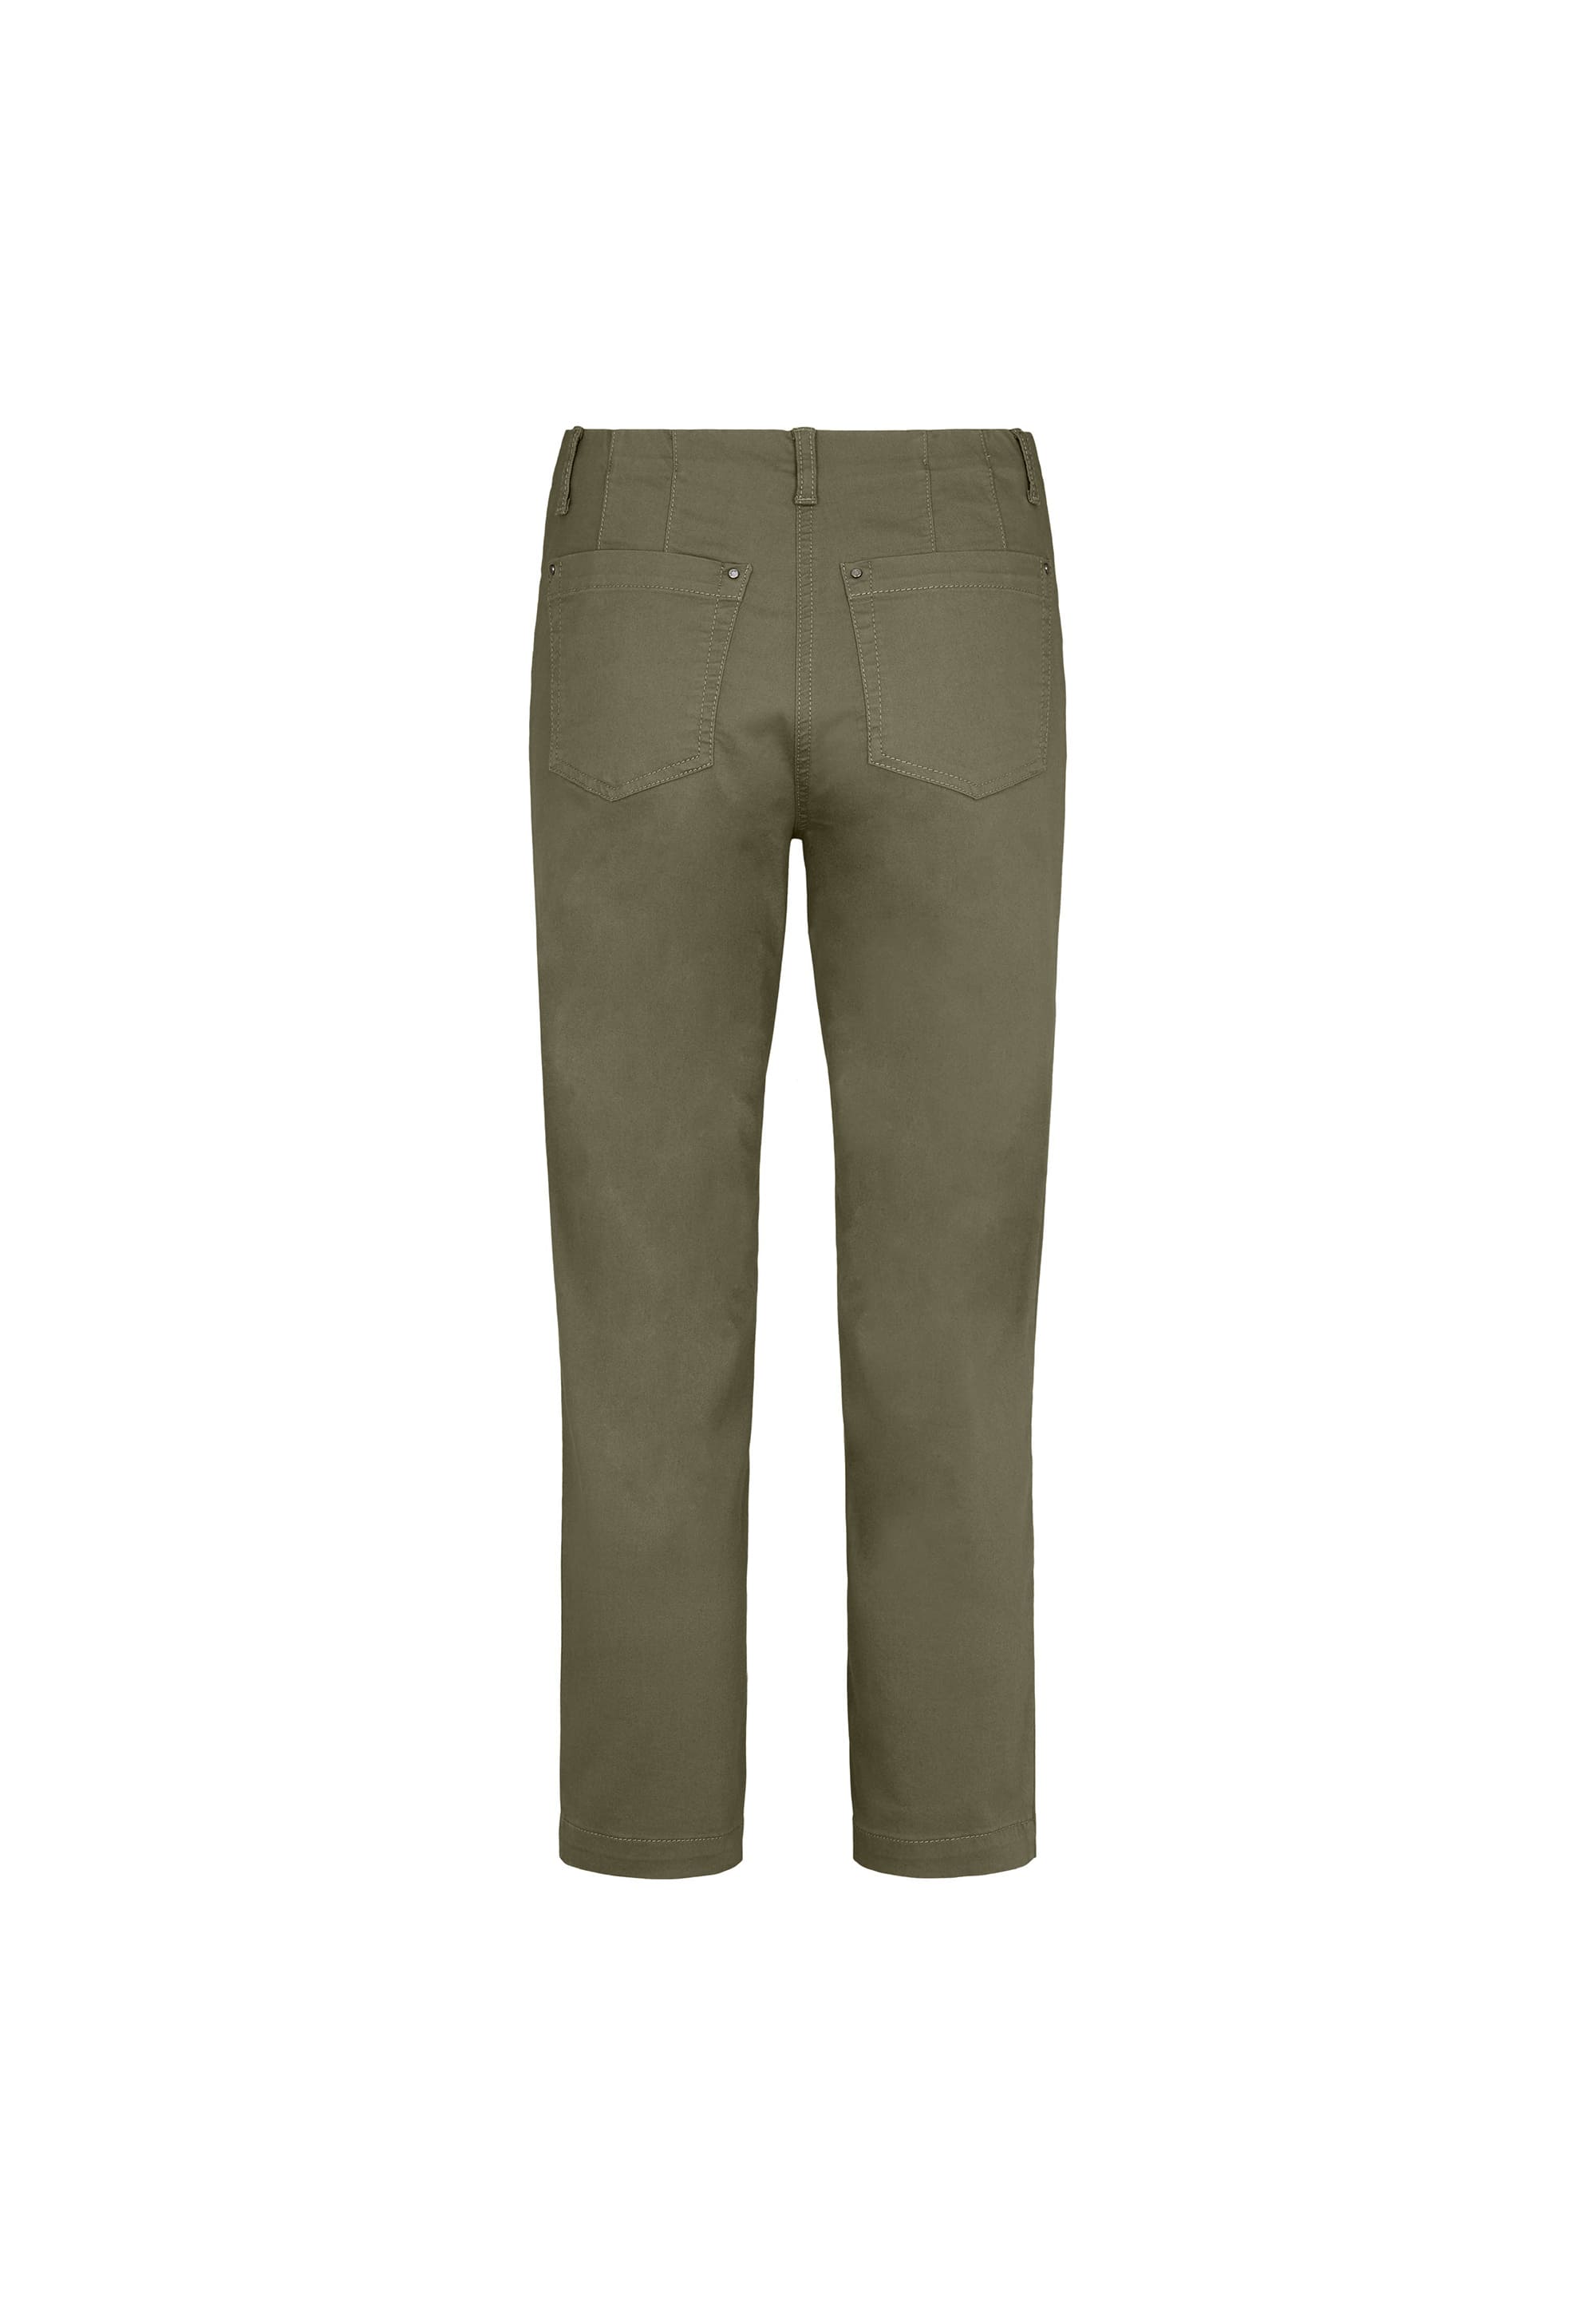 LAURIE Piper Regular Crop Trousers REGULAR 55000 Dried Olive